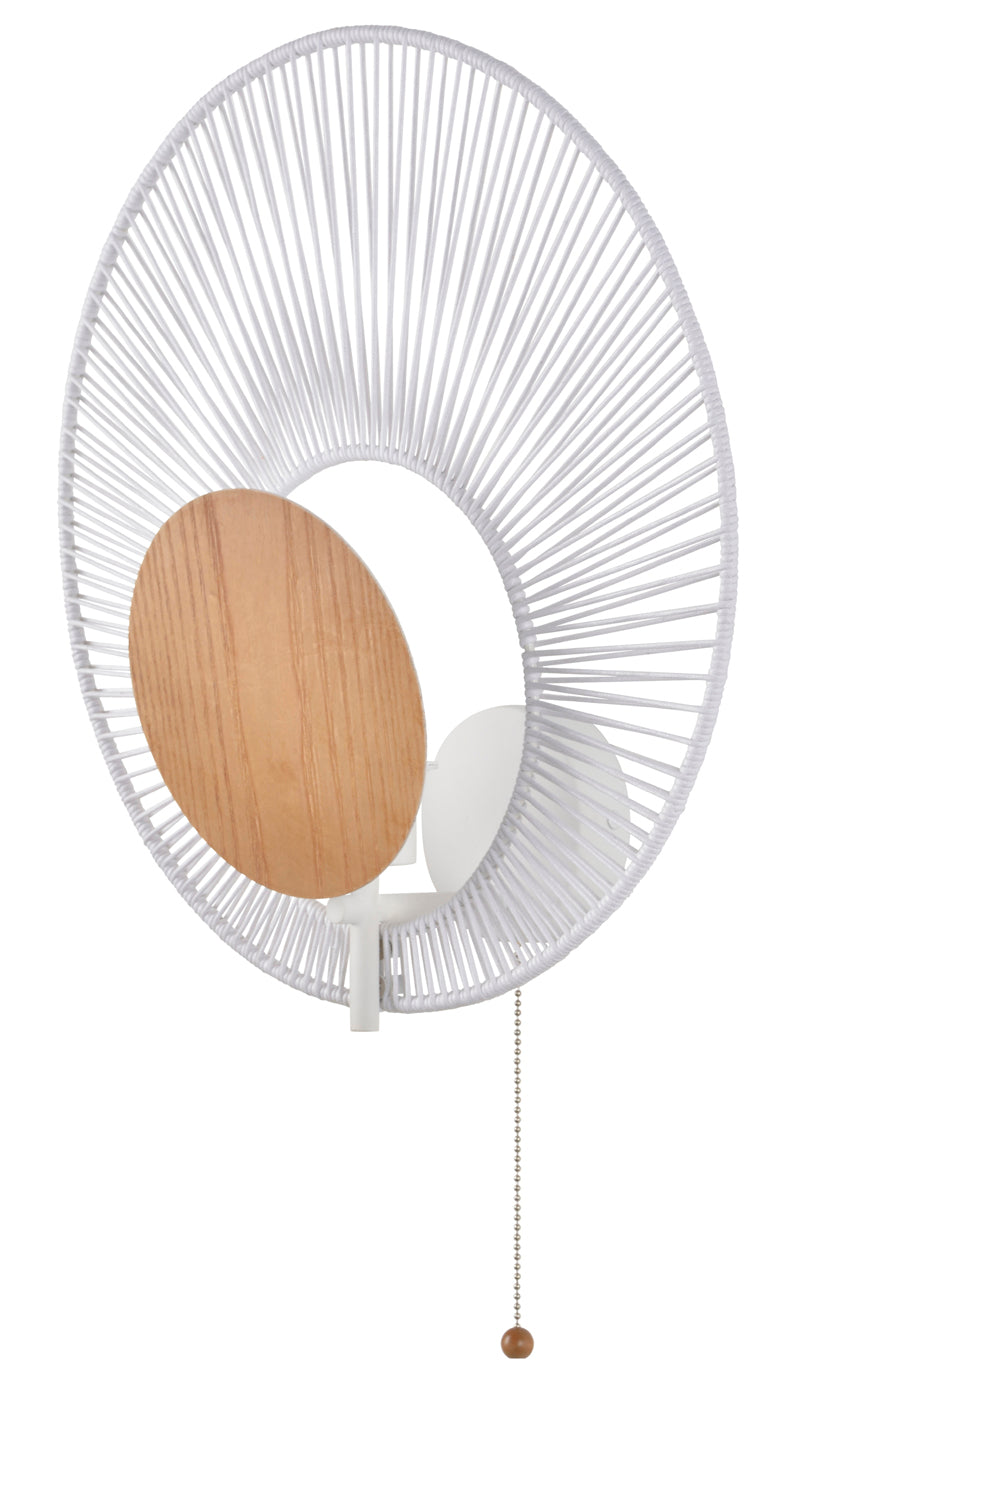 Oyster Wall Light by Forestier